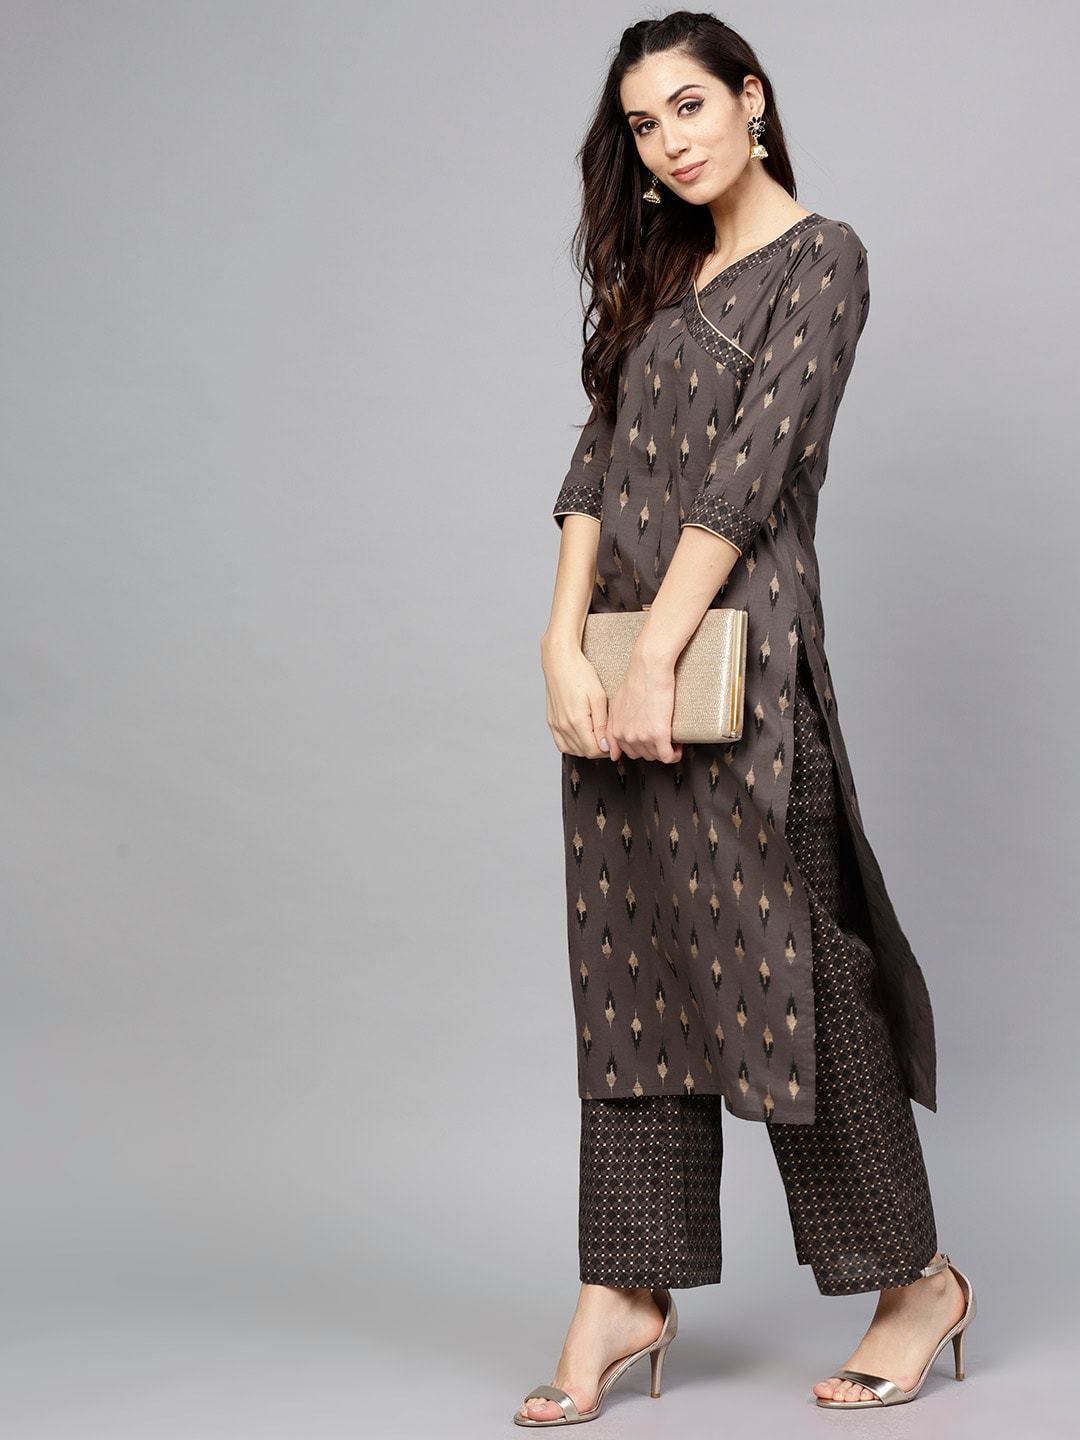 Women's  Charcoal & Gold-Toned Printed Kurta with Trousers - AKS